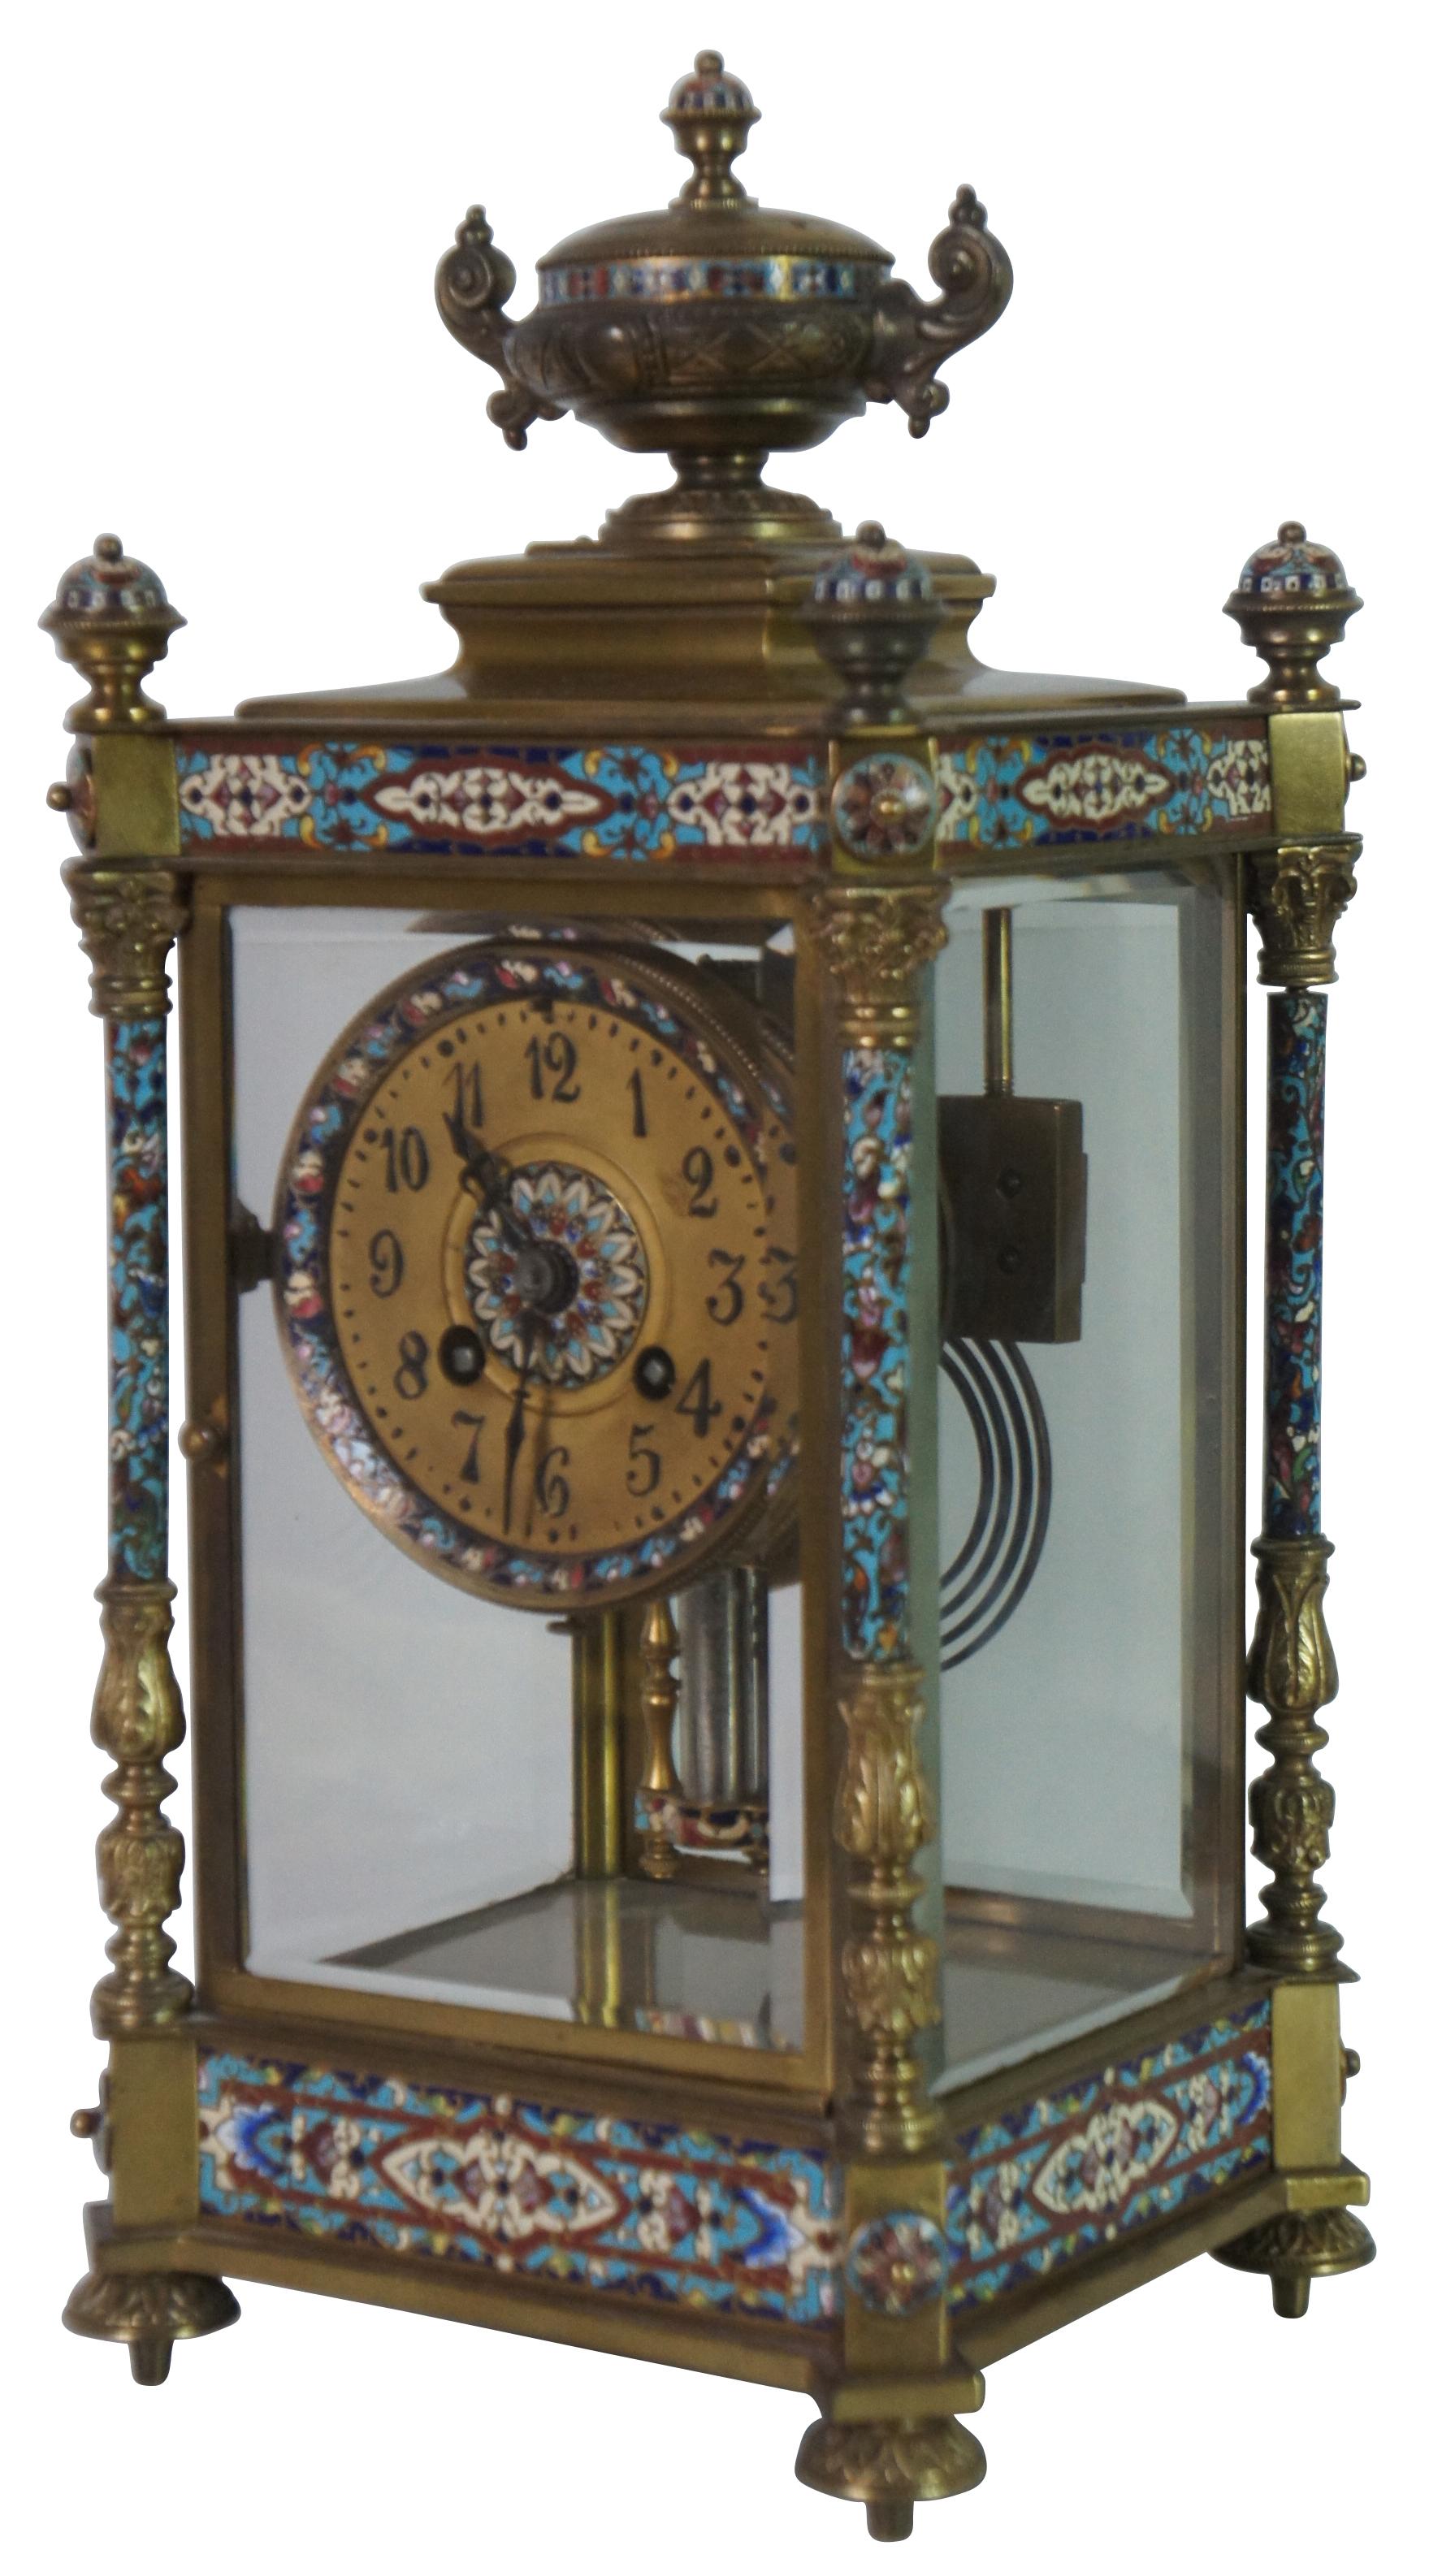 Antqiue late 19th Century French Japy Freres gilt brass enameled mantel clock featuring neoclassical styling with polychrome champleve enamel accents, four columns with spire finials, beveled glass sides and trophy vase topper. Stamped with Japy